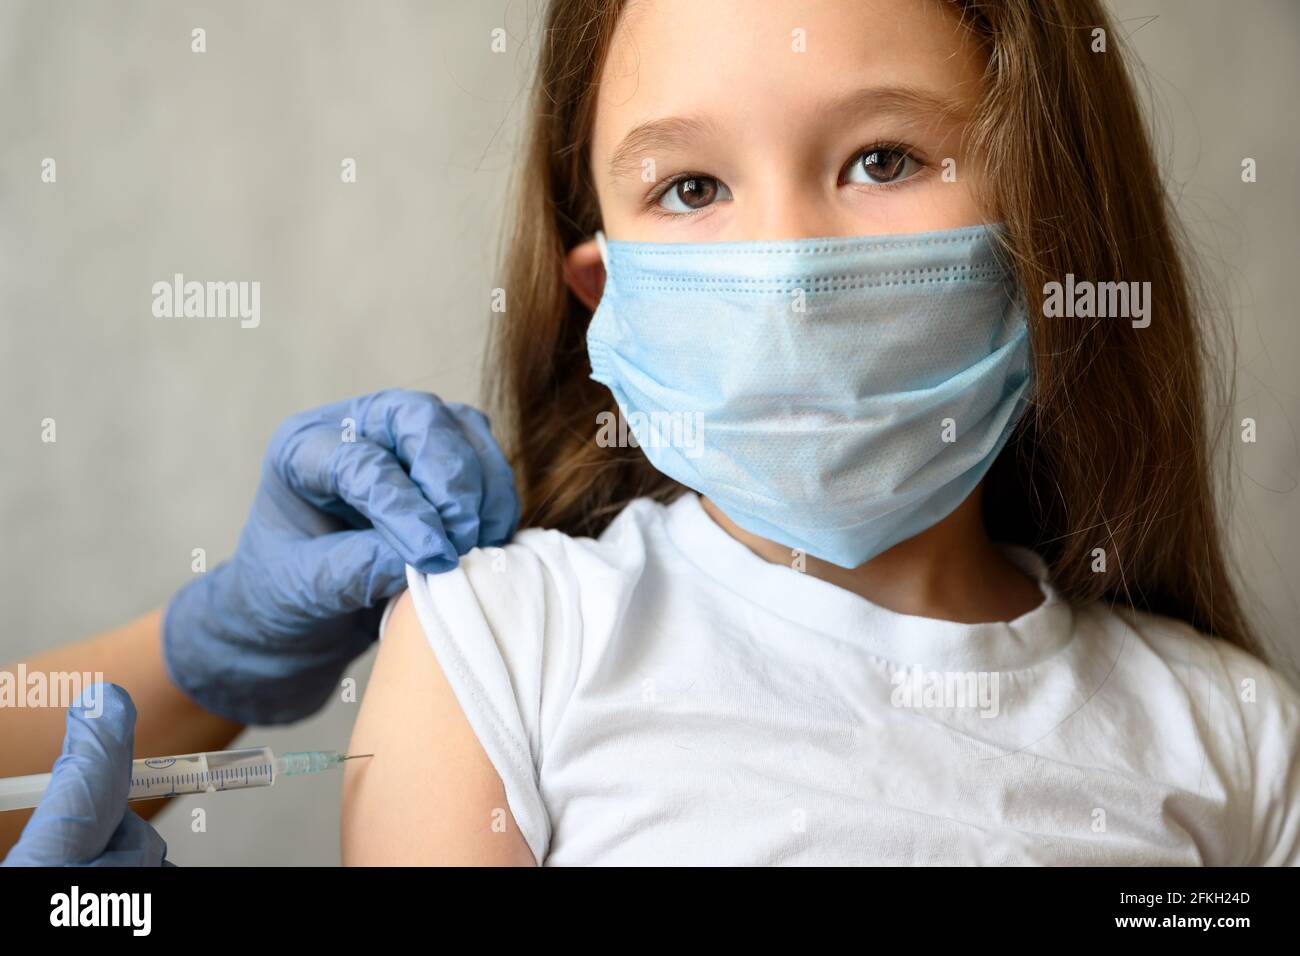 Vaccination of kid from COVID-19 or flu, pretty little girl looks at camera during coronavirus vaccine injection. Cute child face in mask and syringe. Stock Photo